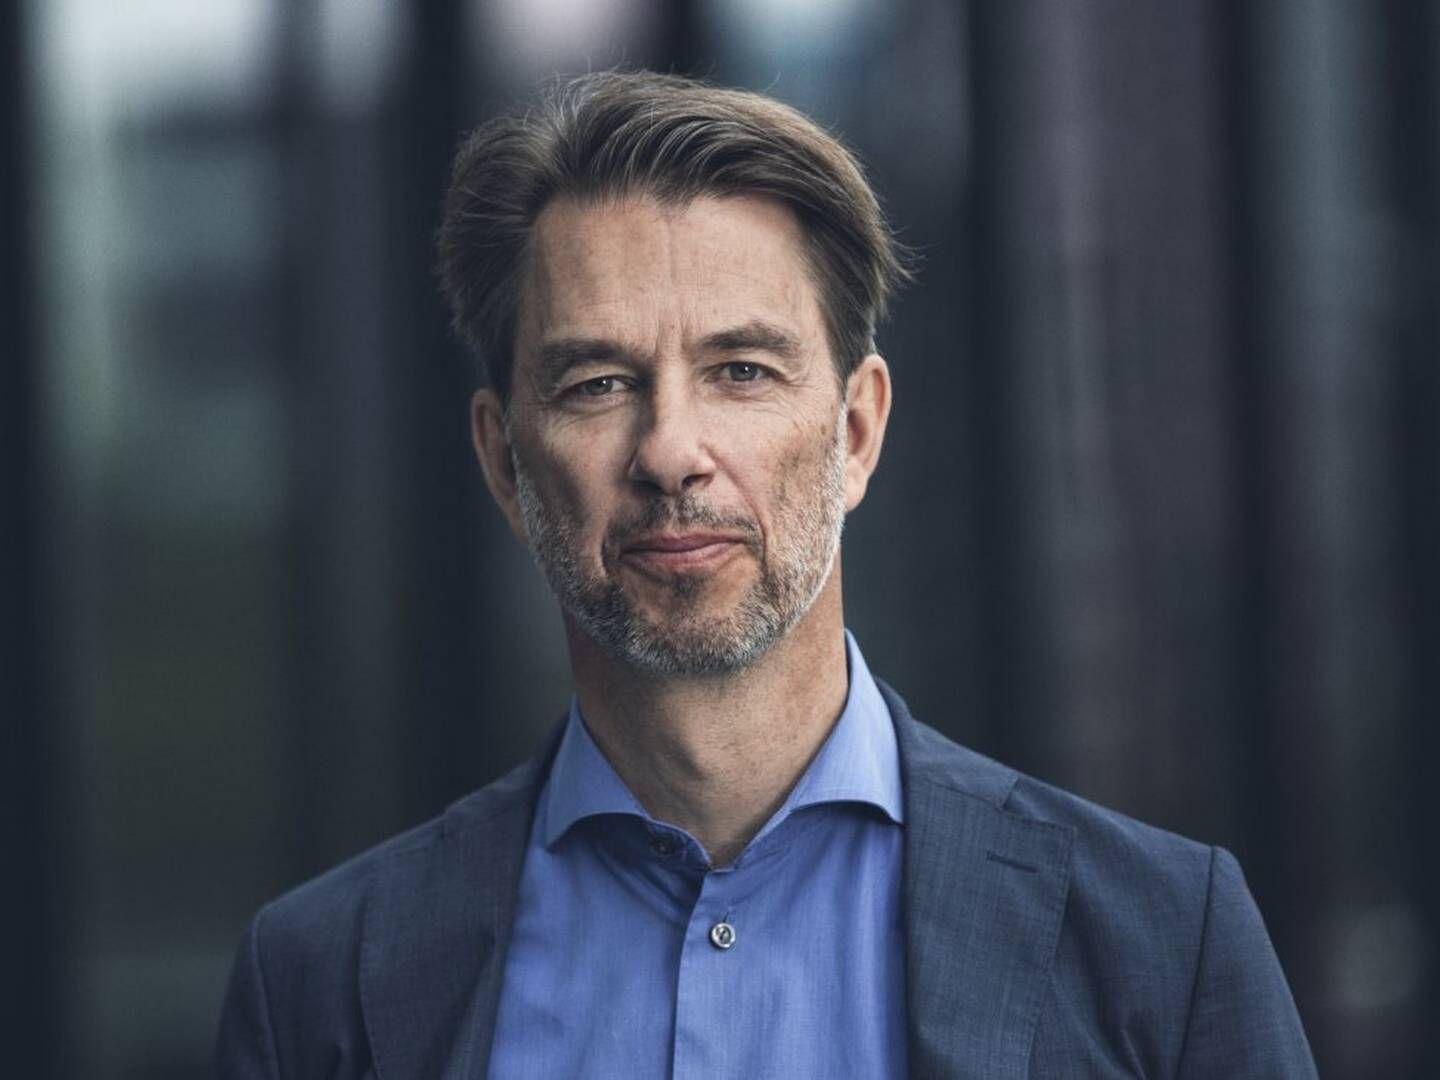 Nordea's head of responsible investment, Eric Pedersen, says the asset manager would rather maintain its holding in Tesla and engage with other shareholders on concerns over its CEO, Elon Musk. | Foto: PR / Nordea